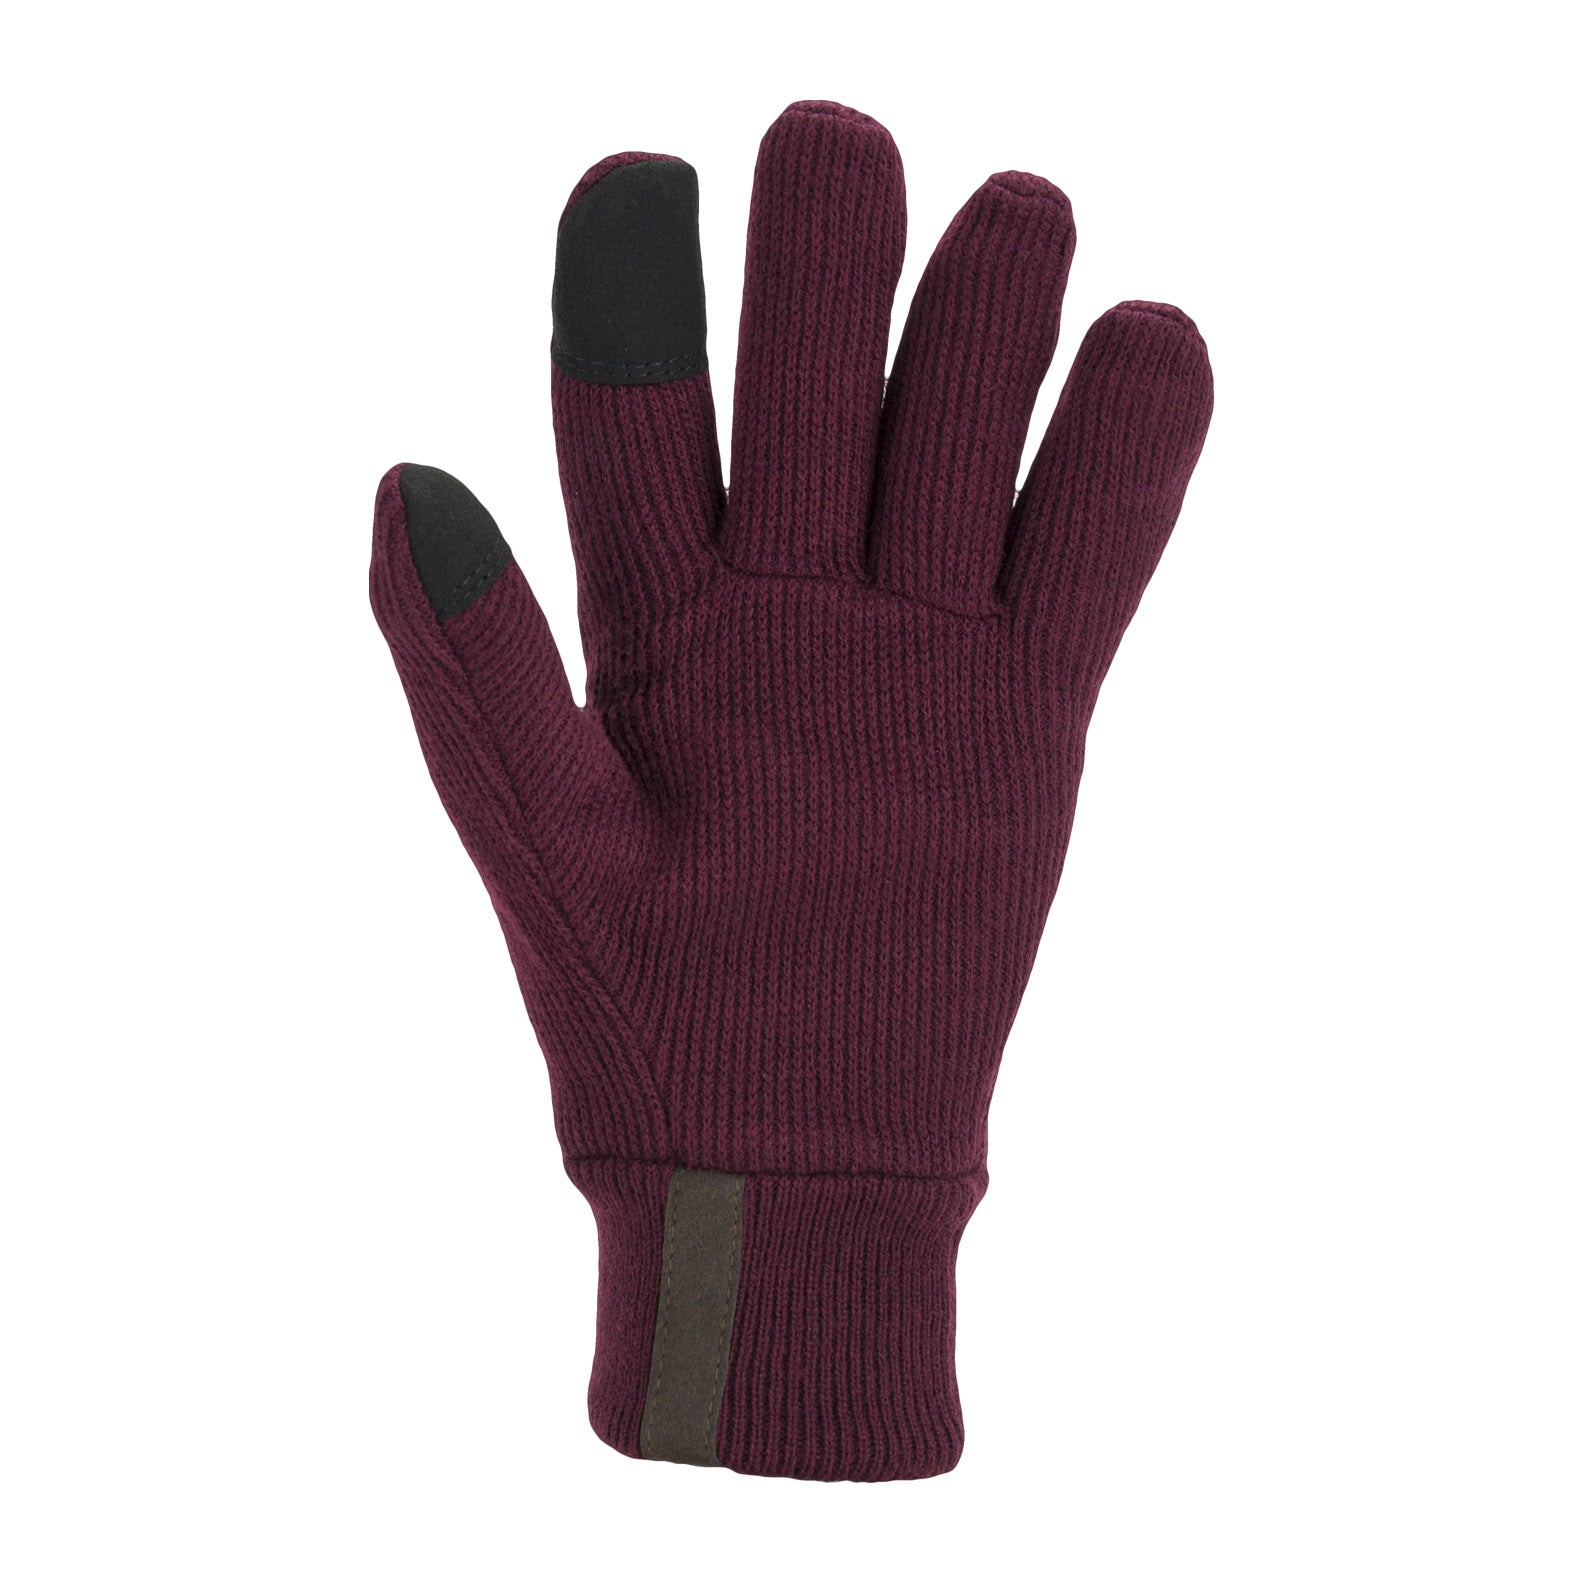 SealSkinz-Windproof-All-Weather-Knitted-Gloves